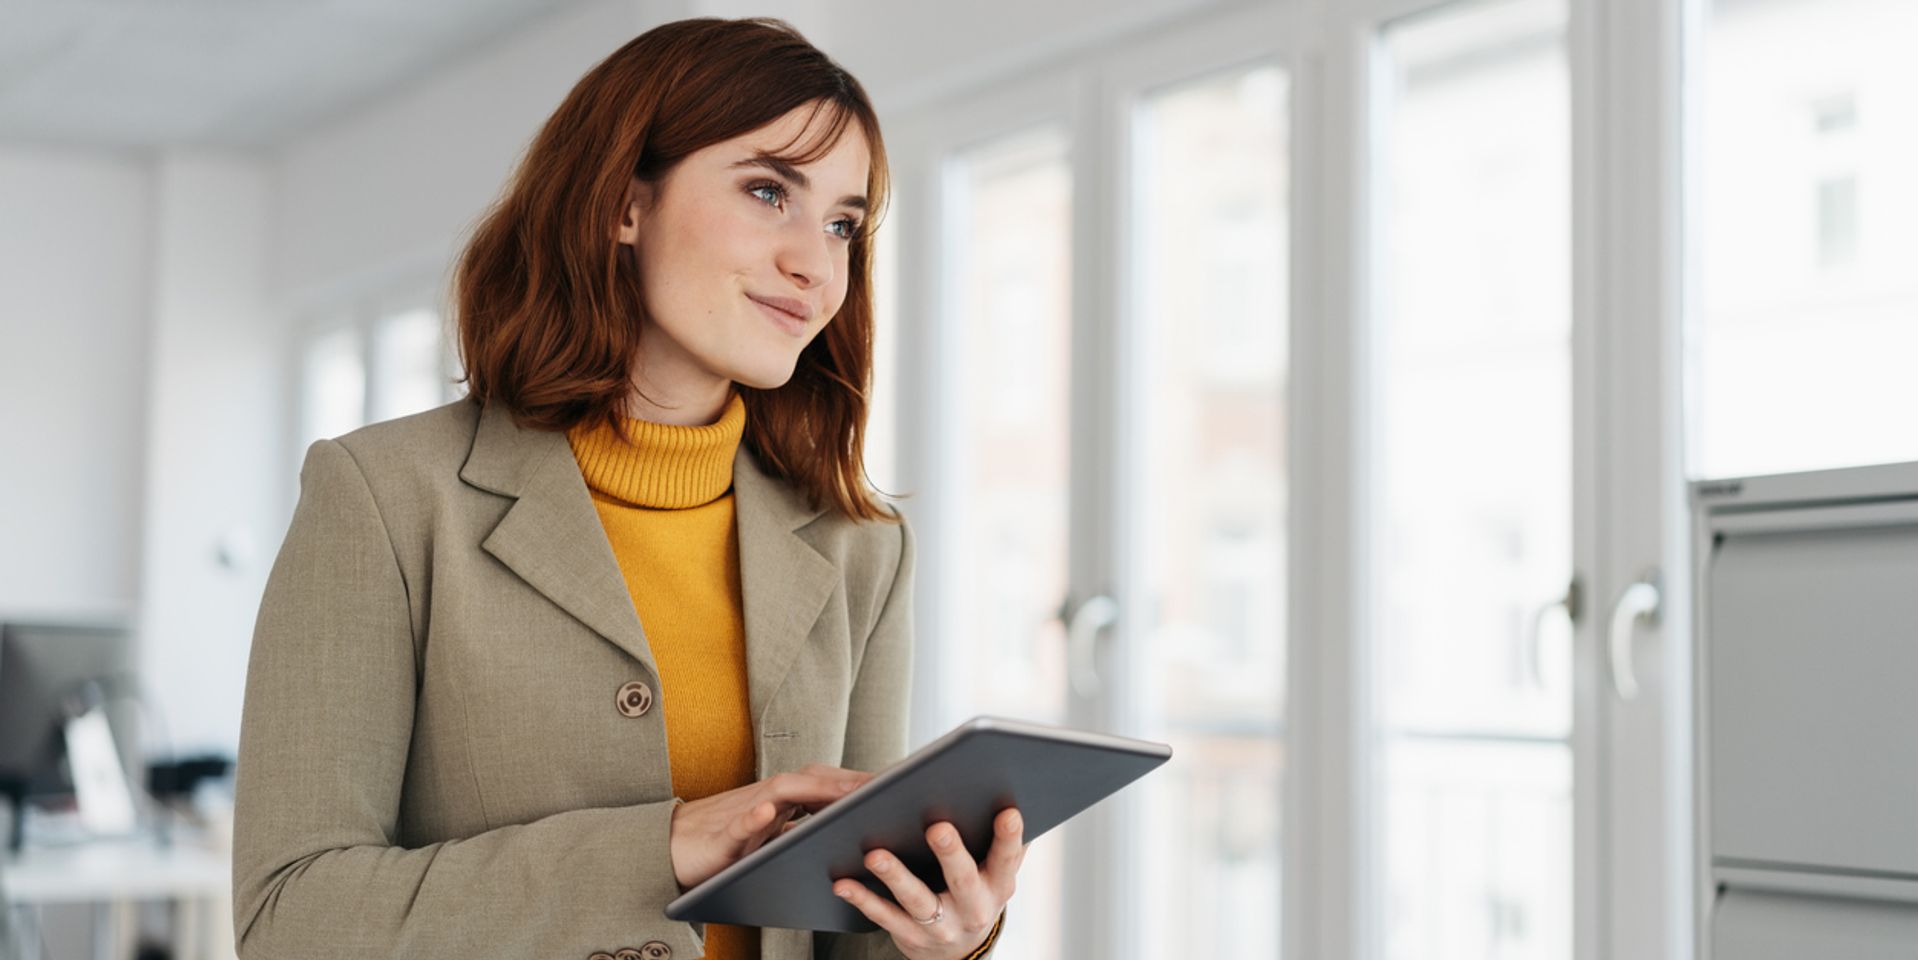 Business woman standing with an ipad